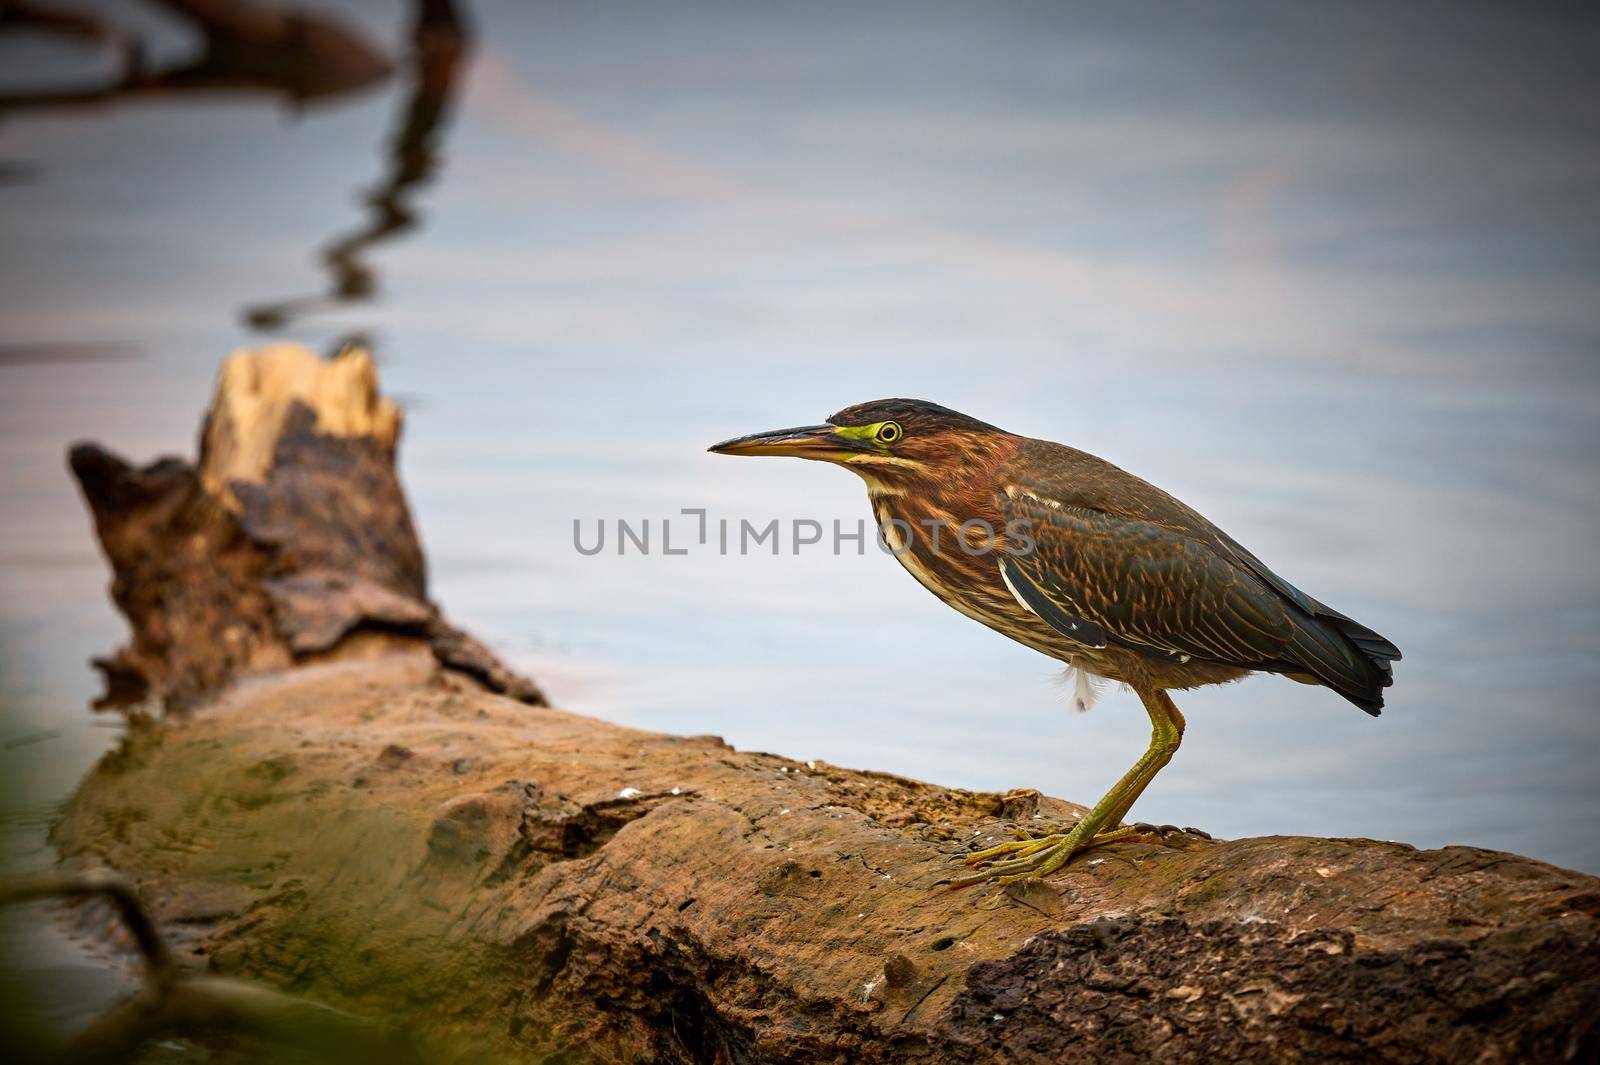 Green Heron (Butorides virescens) stand on submerged log at Lake Chatuge, NC. by patrickstock